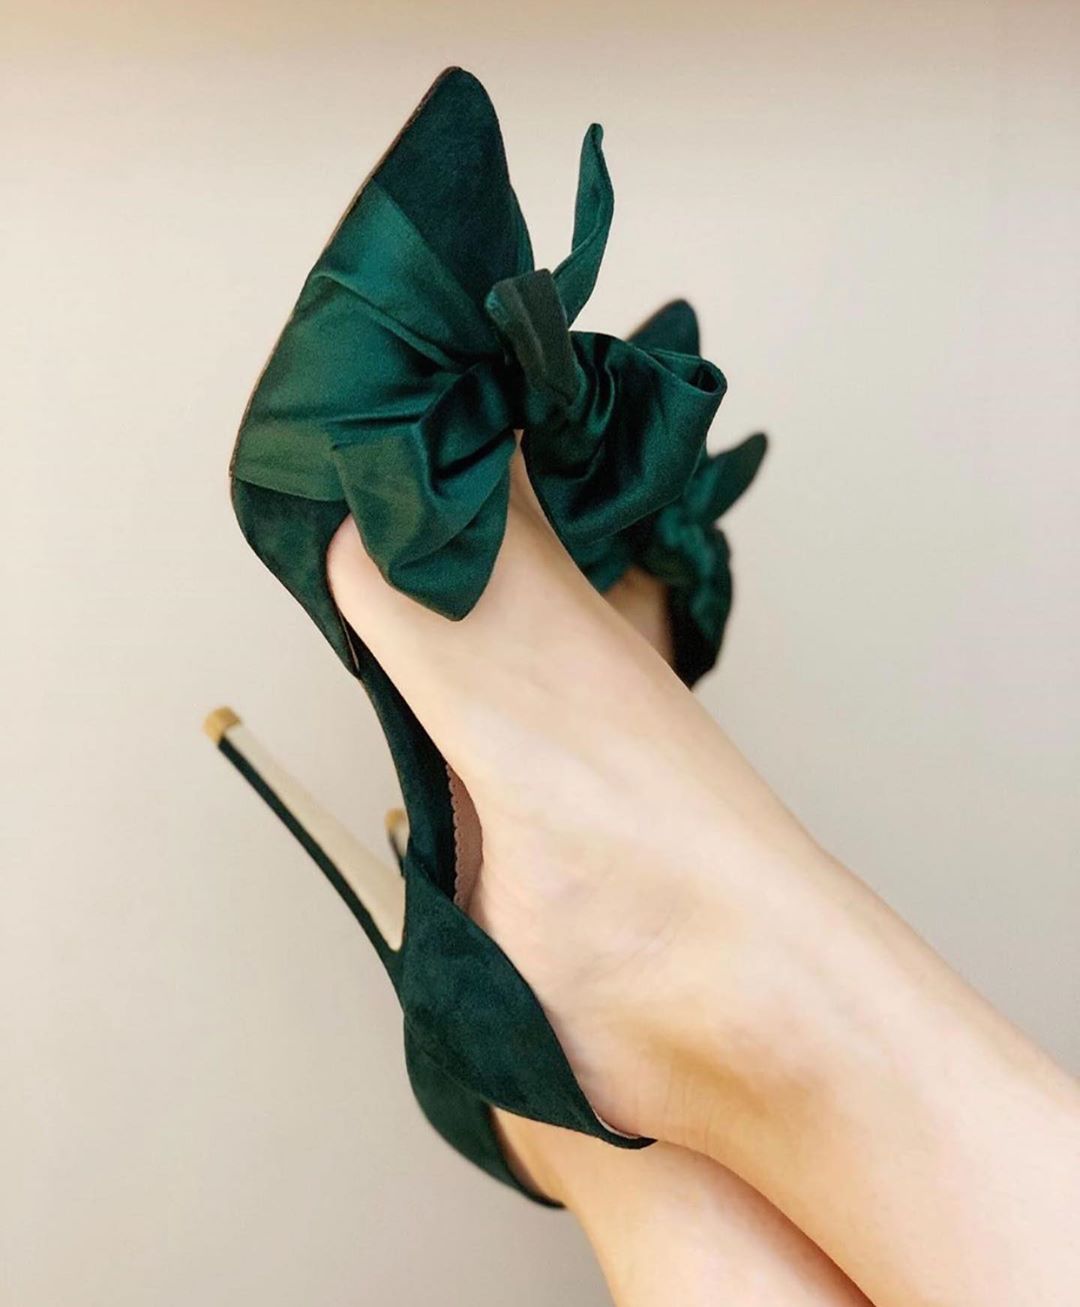 Today we're talking all about texture and design in the scope of wedding planning, and these emerald satin heels from Emmy London are the picture perfect example of why this design element makes all the difference in the world #bridalheels #luxurywedding #weddingdesign // Willow & Oak Events